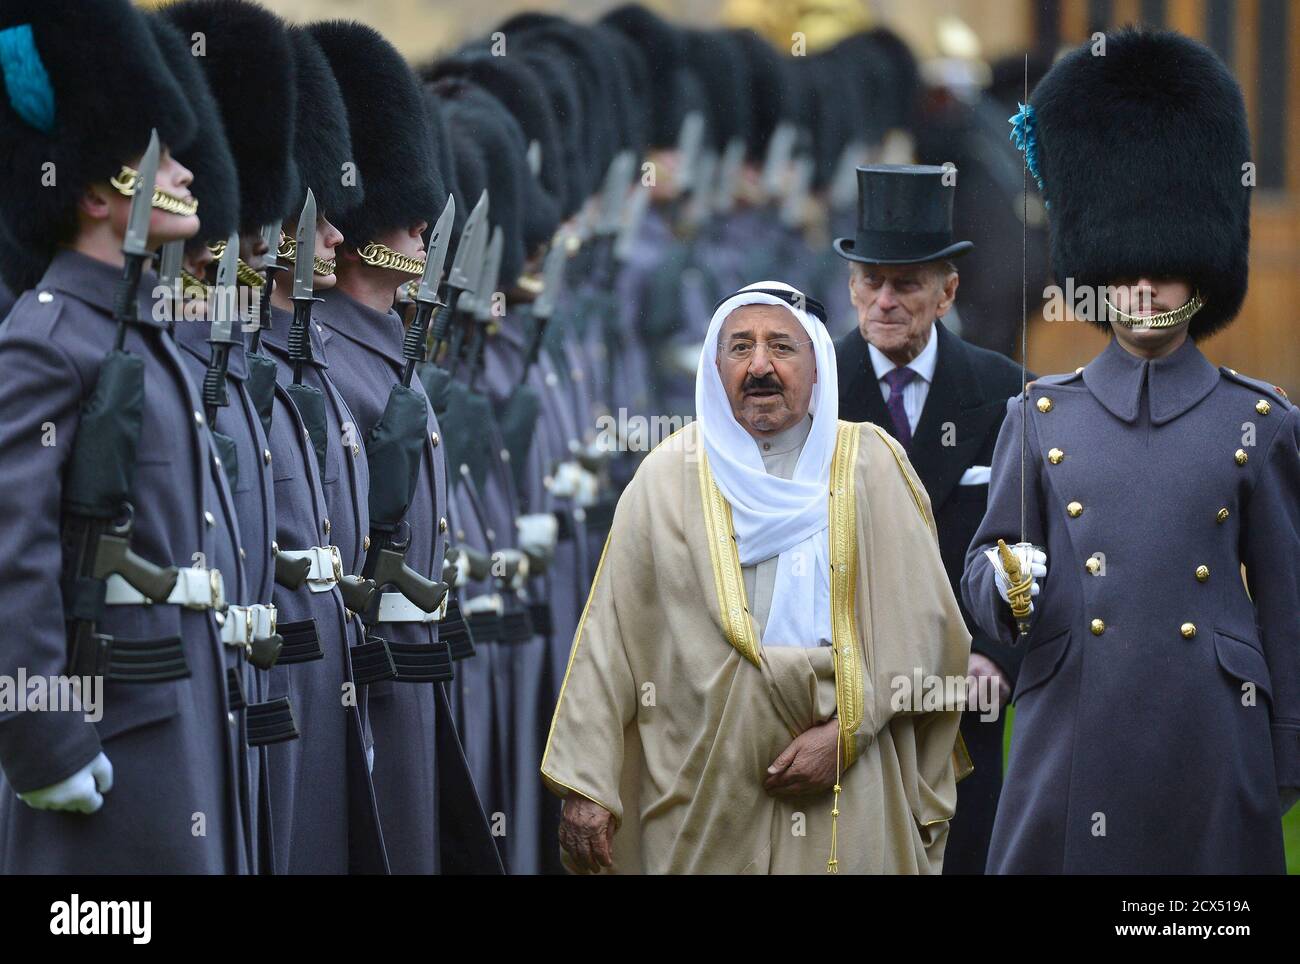 The Emir of Kuwait, Sheikh Sabah al-Ahmad al-Sabah (C), is followed by Britain's Prince Philip (2nd R) as he inspects members of the 1st Battalion Irish Guards at Windsor Castle in Windsor, southern England November 27, 2012. The Emir arrived at Windsor Castle on Tuesday for the start of a state visit to Britain.    REUTERS/Toby Melville (BRITAIN - Tags: ENTERTAINMENT POLITICS SOCIETY ROYALS TPX IMAGES OF THE DAY) Stock Photo